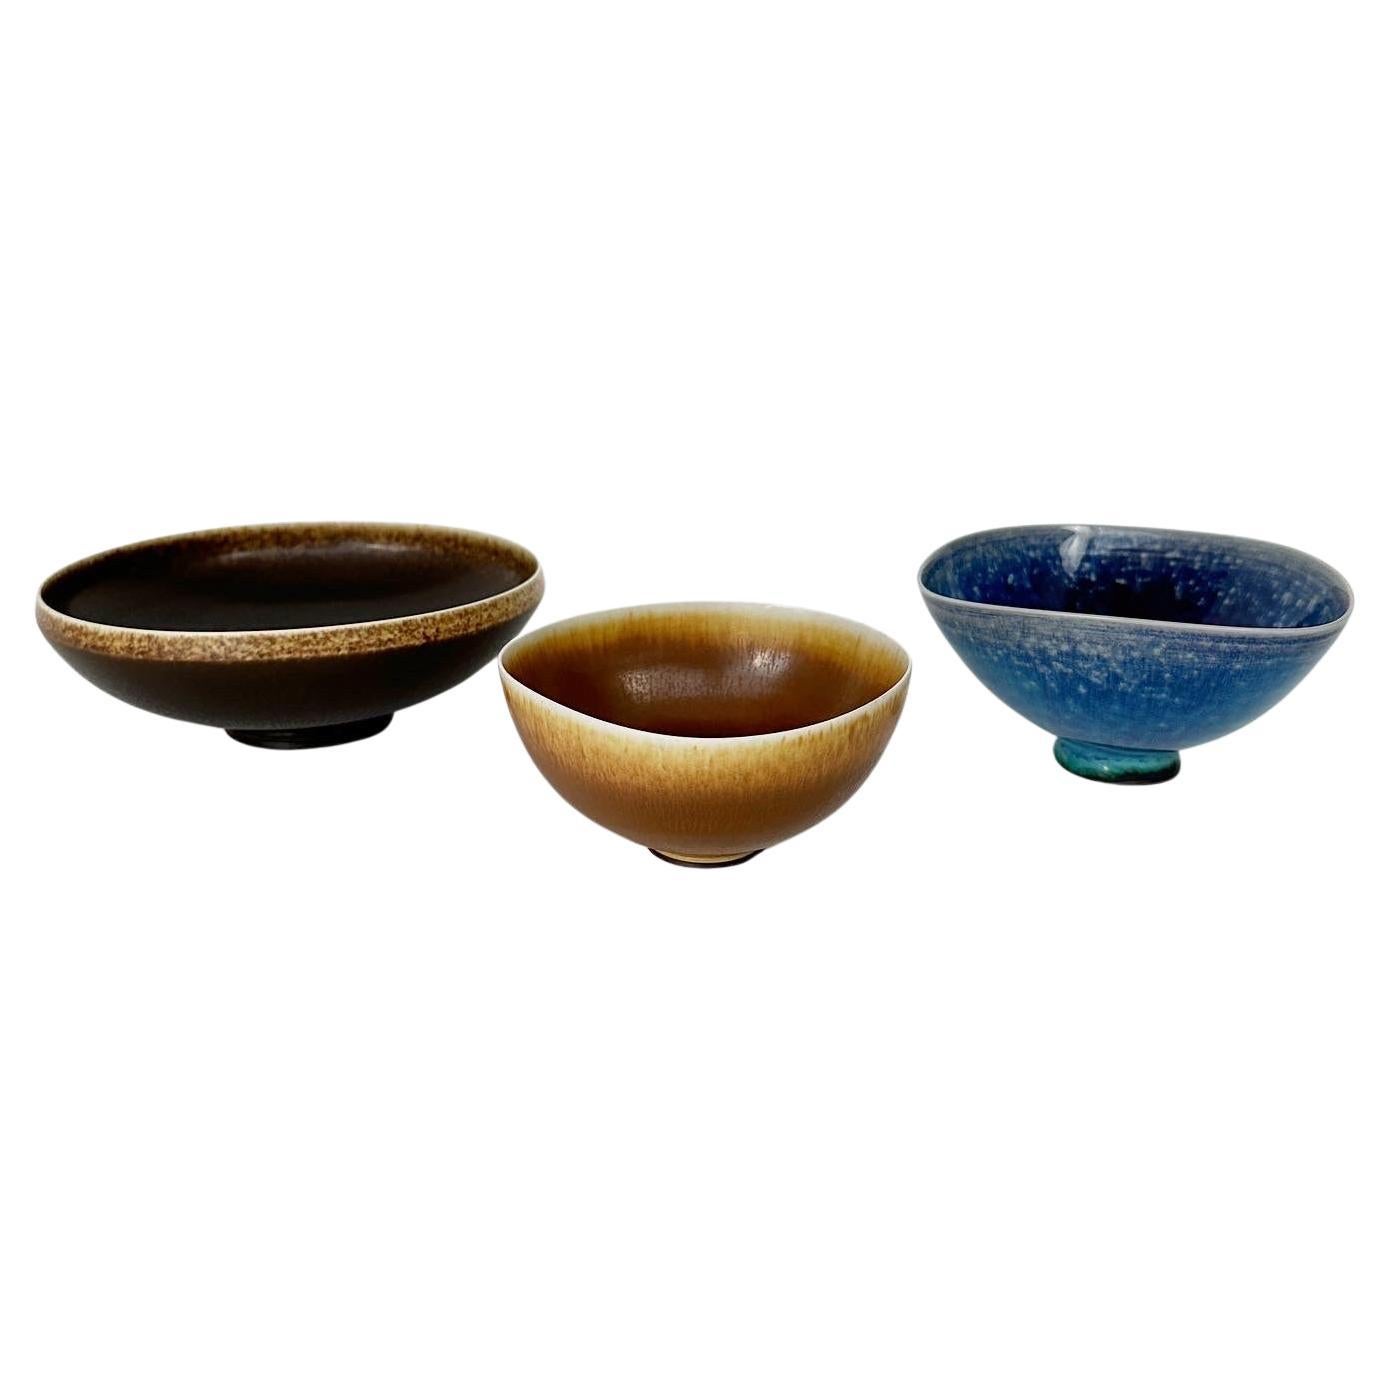 Beautiful stoneware bowls by the one and only ceramic artist Berndt Friberg. 

All thrown and glazed by the master himself in his workshop at Gustavsberg porcelain factory, Sweden. 

Dark brown 
Diameter: 15 cm
Height: 5.2 cm
Production year: